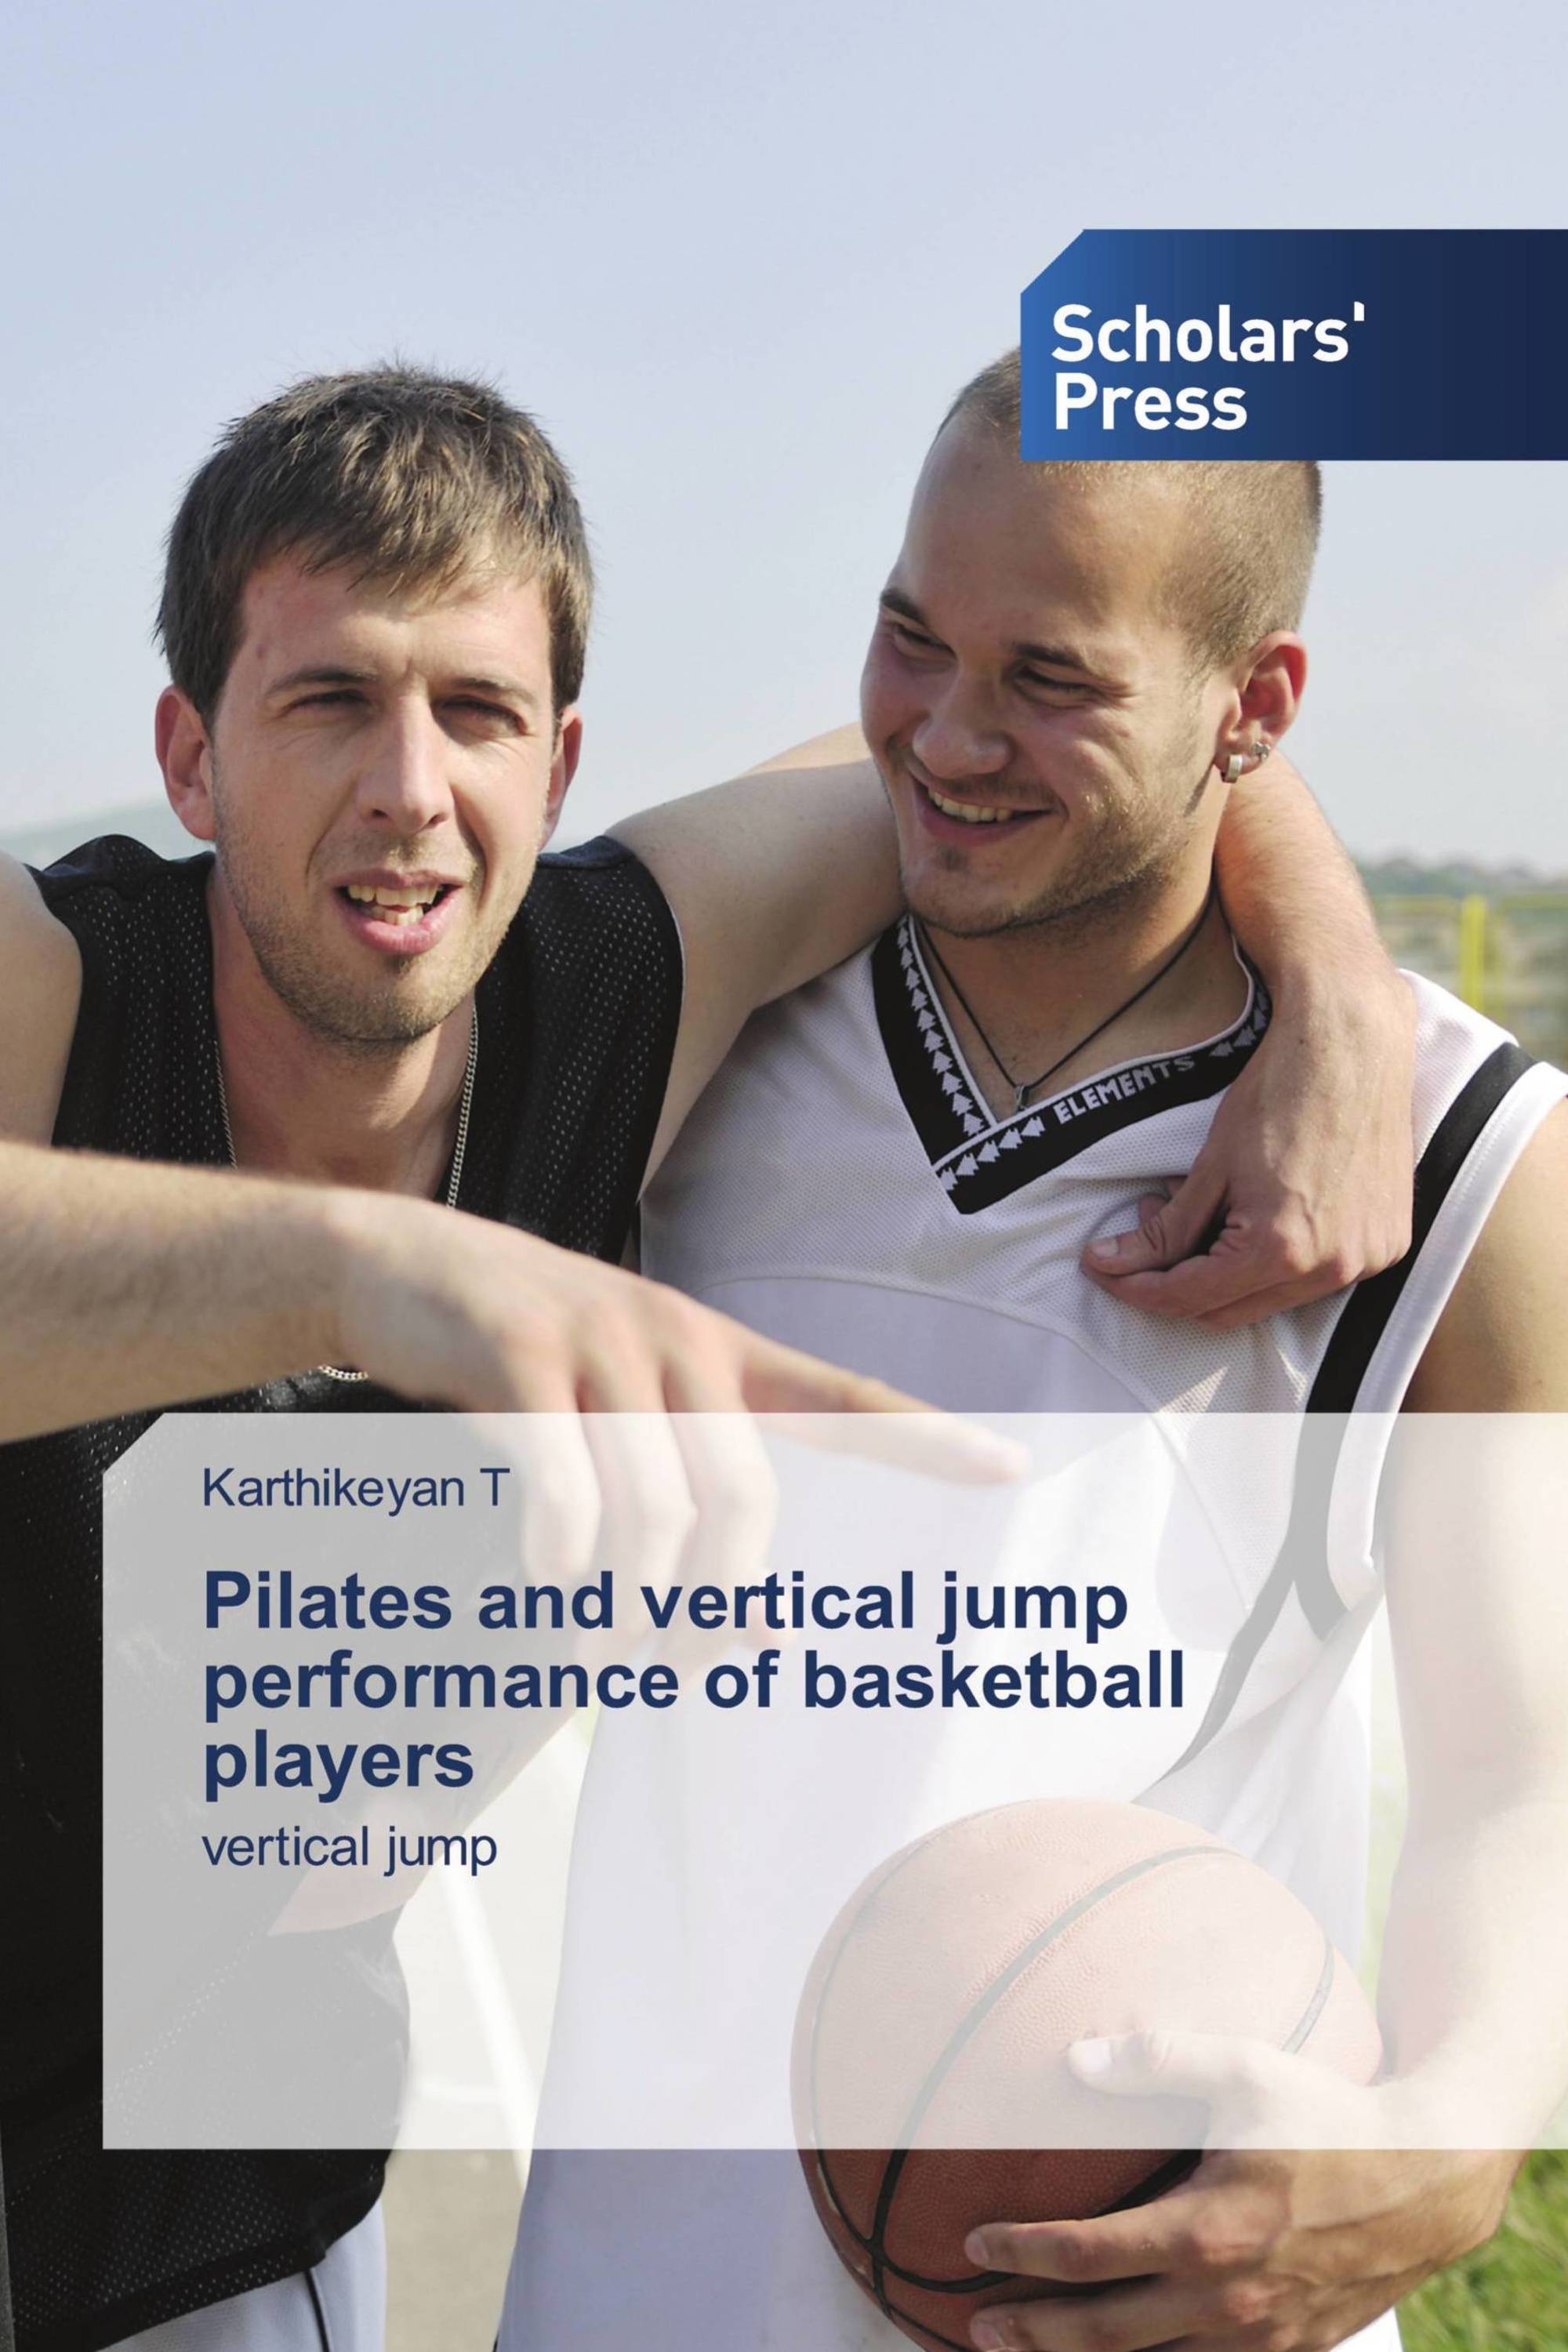 Pilates and vertical jump performance of basketball players